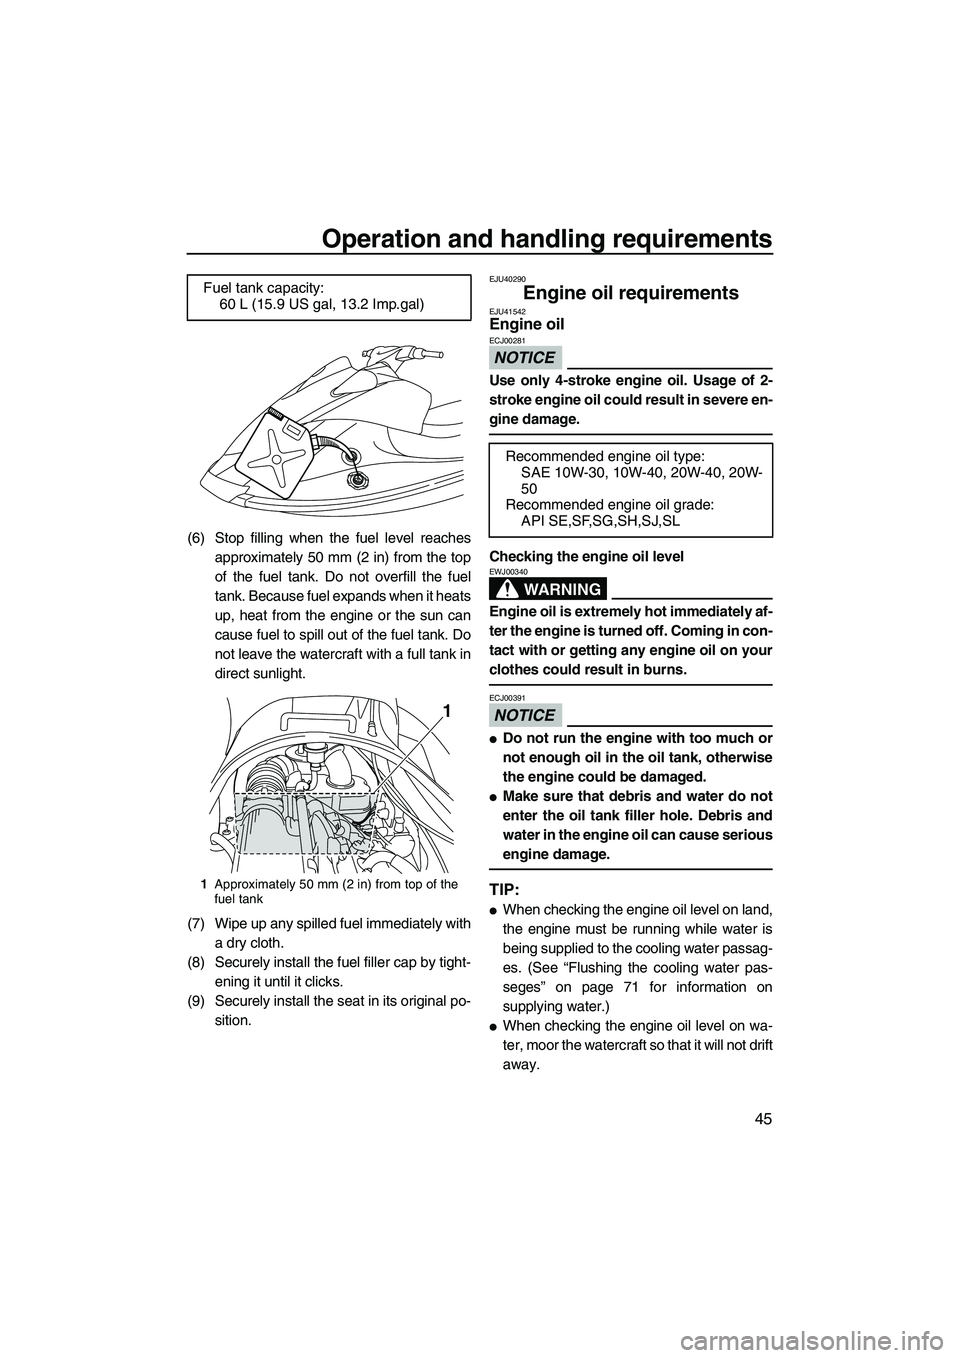 YAMAHA VX DELUXE 2013  Owners Manual Operation and handling requirements
45
(6) Stop filling when the fuel level reachesapproximately 50 mm (2 in) from the top
of the fuel tank. Do not overfill the fuel
tank. Because fuel expands when it